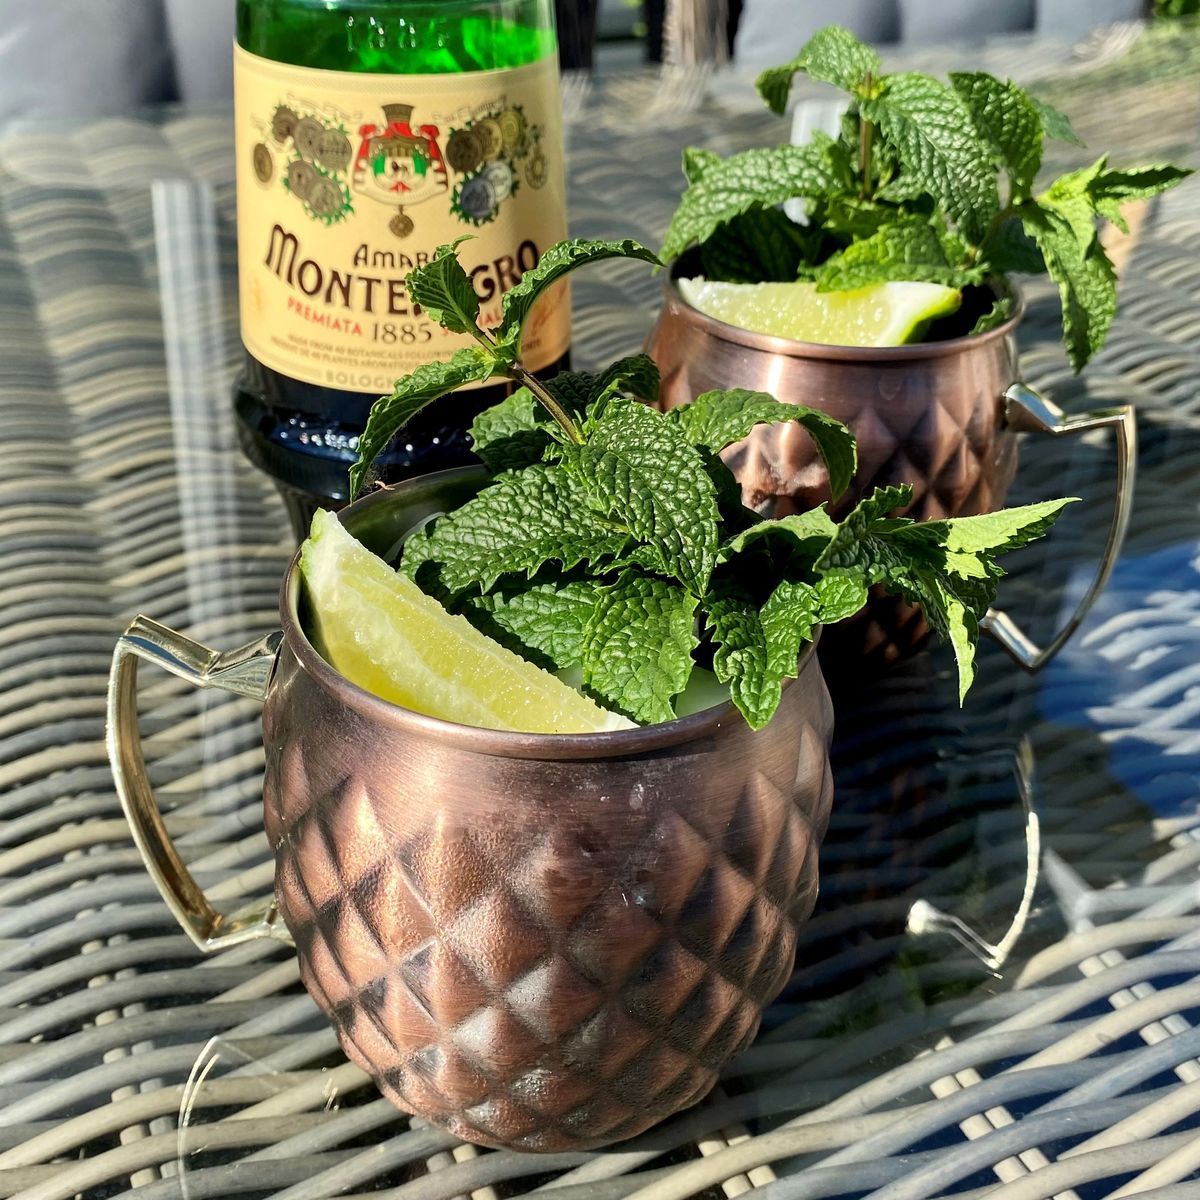 Swap Amaro Montenegro for the vodka in a Moscow mule and you get the Monte mule. I love Amaro Montenegro, so I actually prefer this variation over the original. The floral bitterness of the amaro and the spicy ginger are a great compliment to each other. And it is so refreshing served in a copper mug over ice.